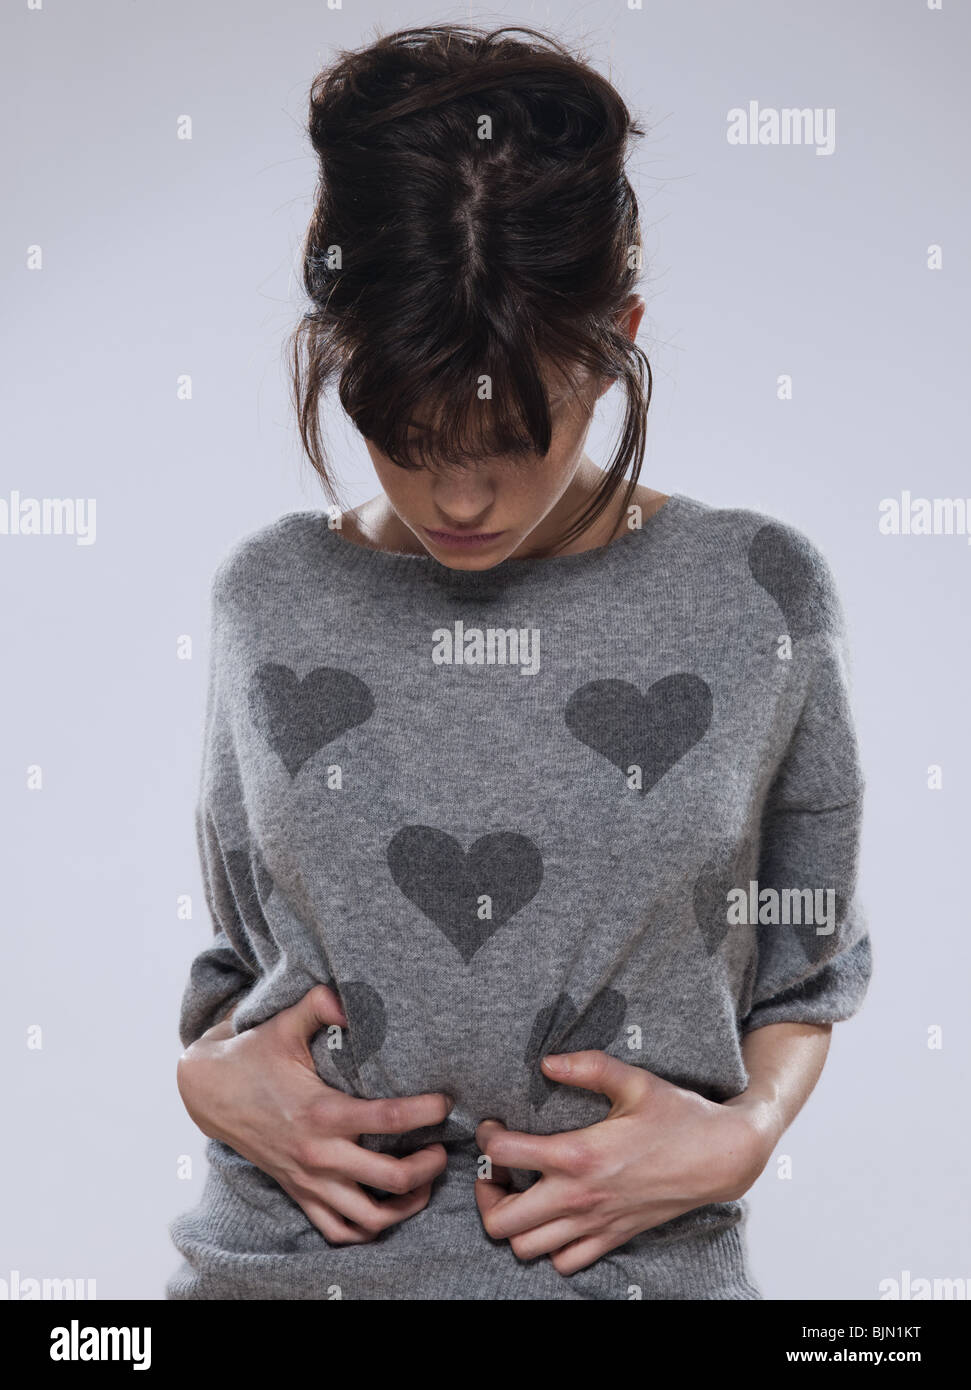 beuatiful caucasian brunette young woman wearing a sweater with hearts on it Stock Photo